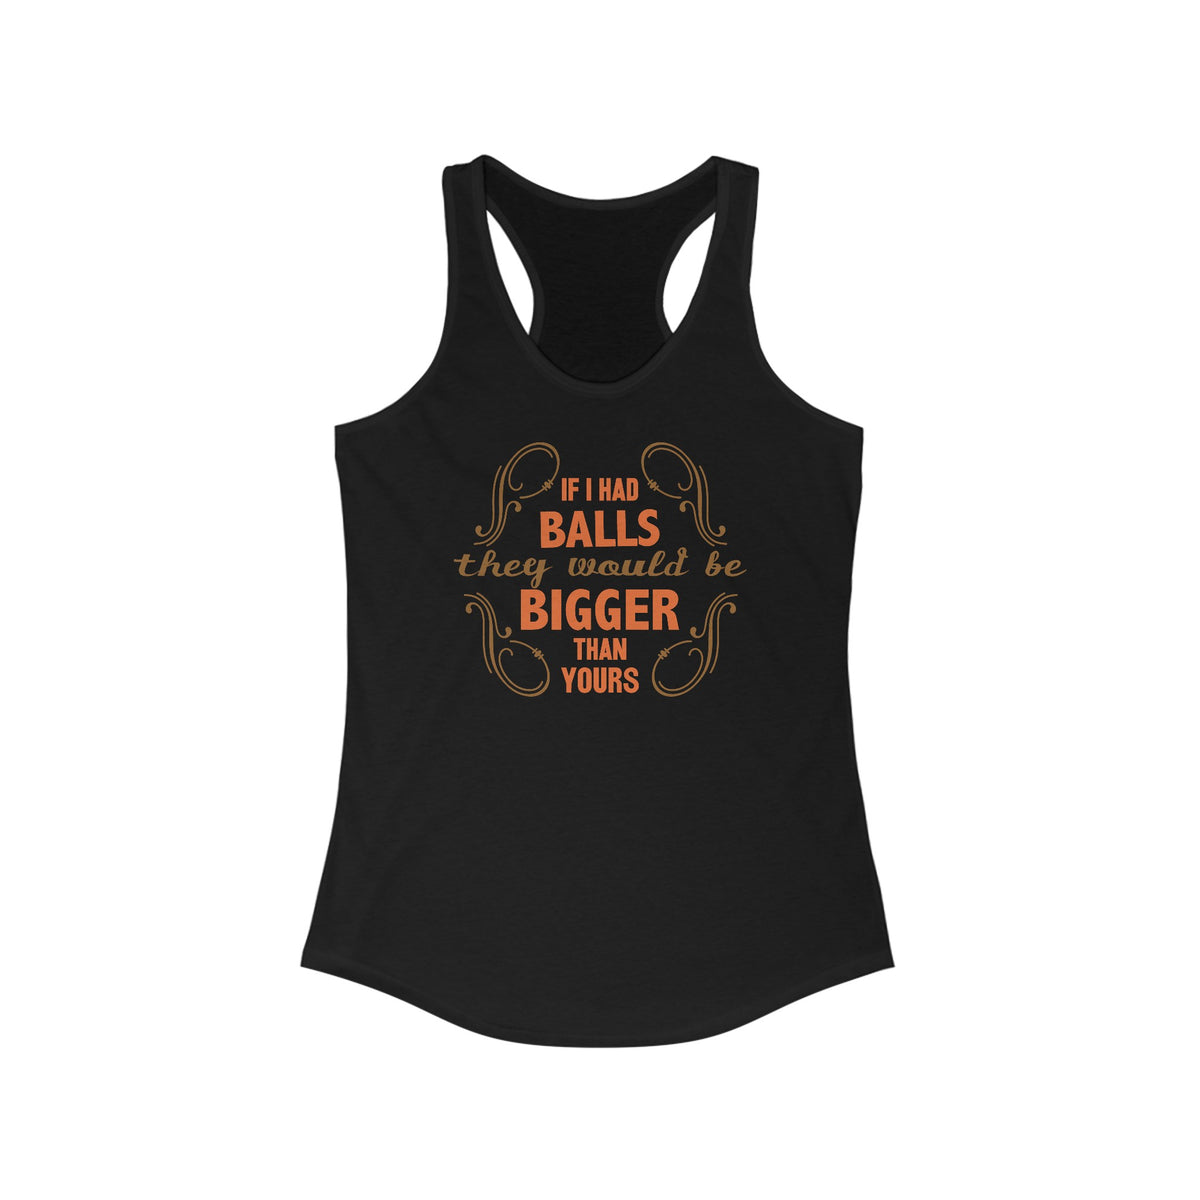 If I Had Balls They Would Be Bigger Than Yours  - Women’s Racerback Tank